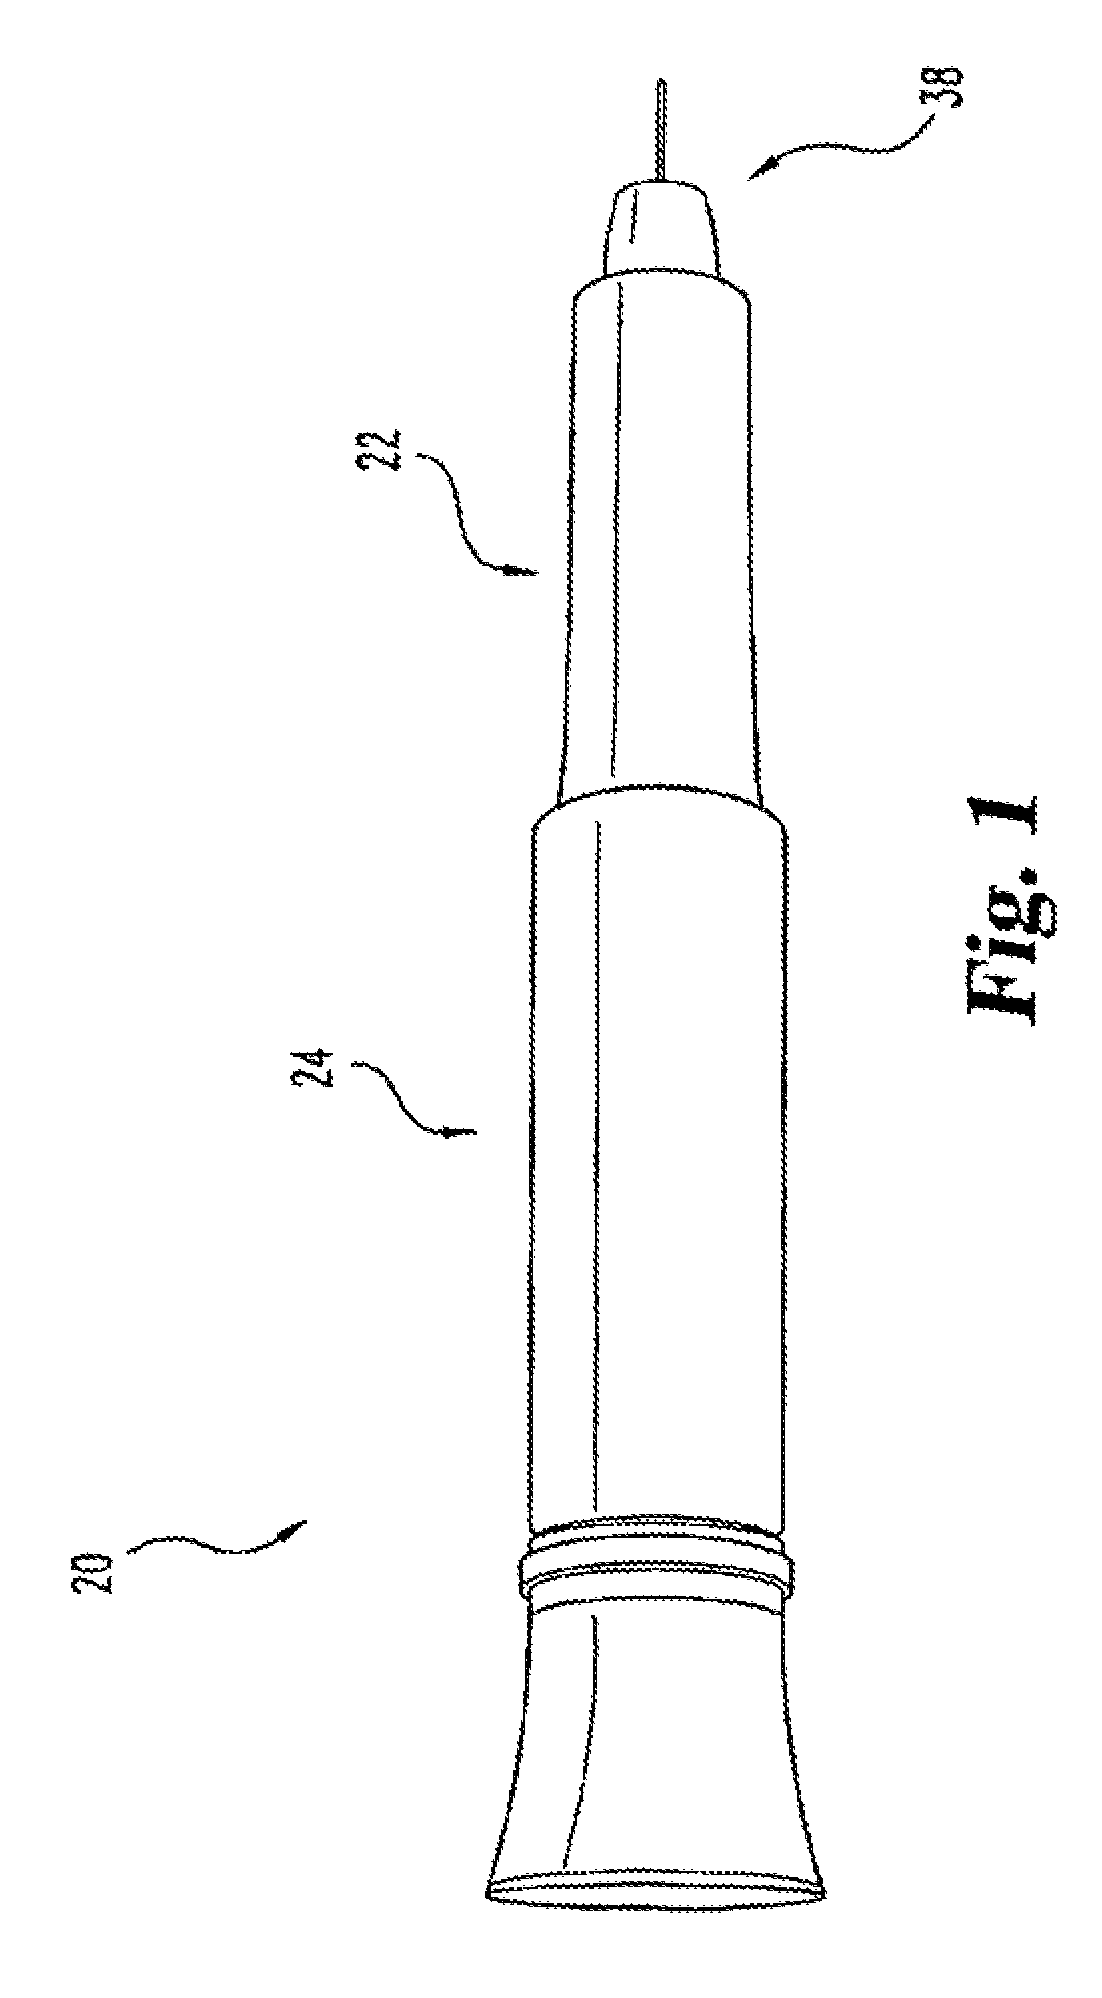 Medication dispensing apparatus configured for rotate to prime and pull/push to inject functionality